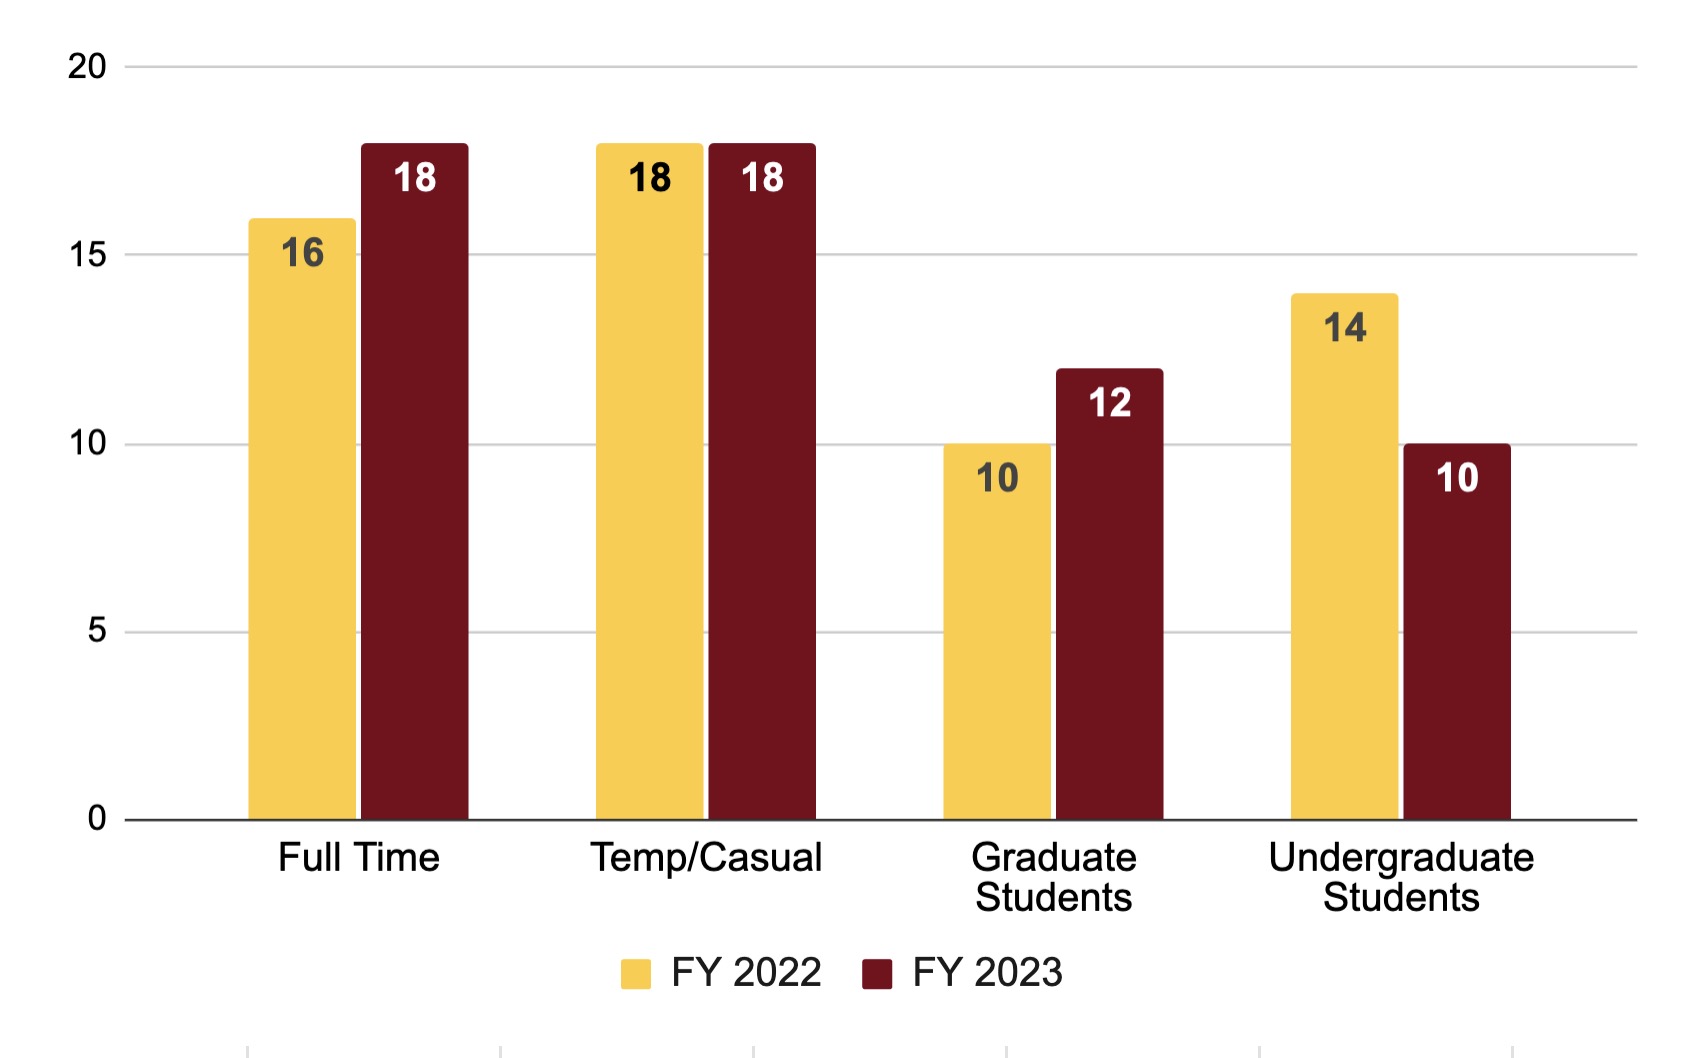 Chart about staff hires: Full time - 16 in FY 2022, 18 in FY 2023, Temp/Casual - 18 in both FY 2022 and FY 2023; Graduate Students: 10 in FY 2022, 12 in FY 2023, Undergraduate students: 14 in FY 2022, 10 in FY 2023